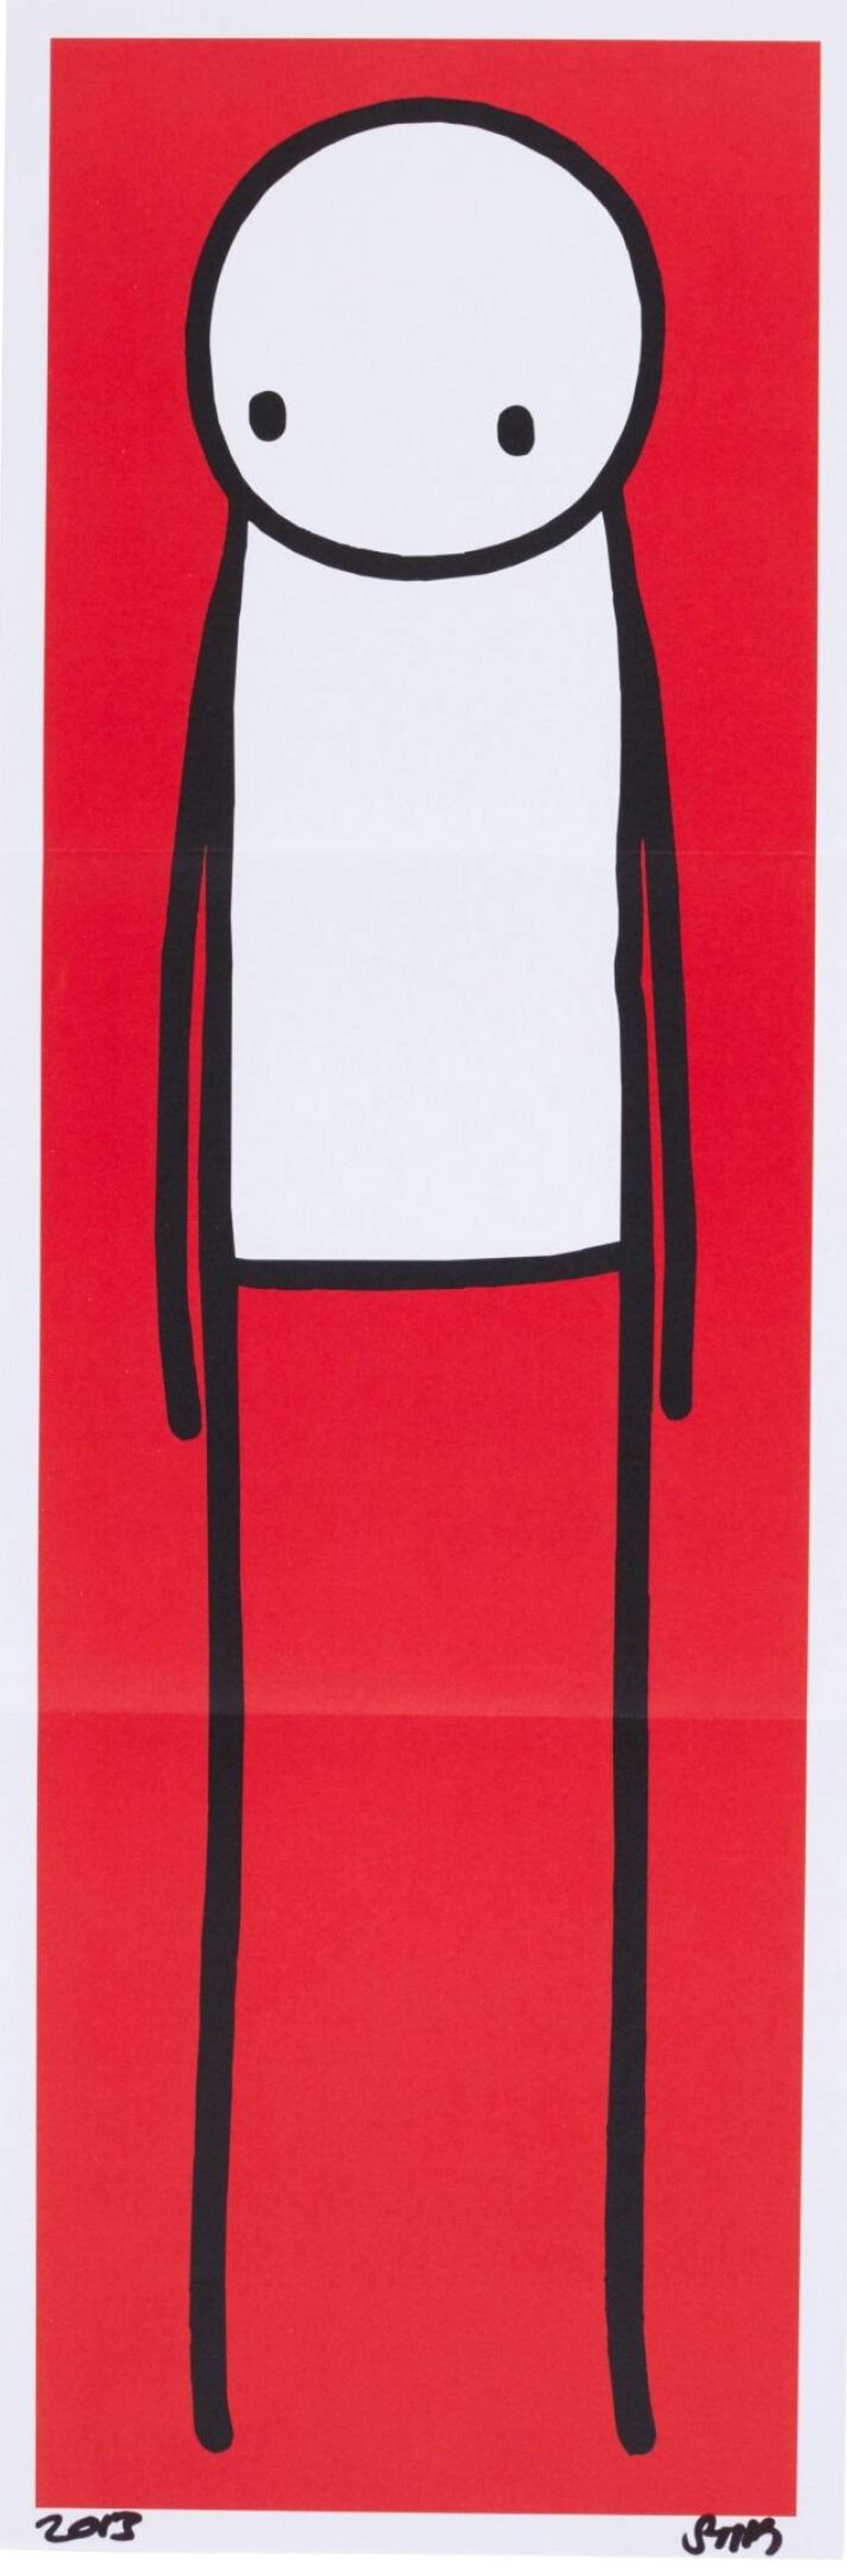 The Big Issue (red) - Signed Print by Stik 2013 - MyArtBroker